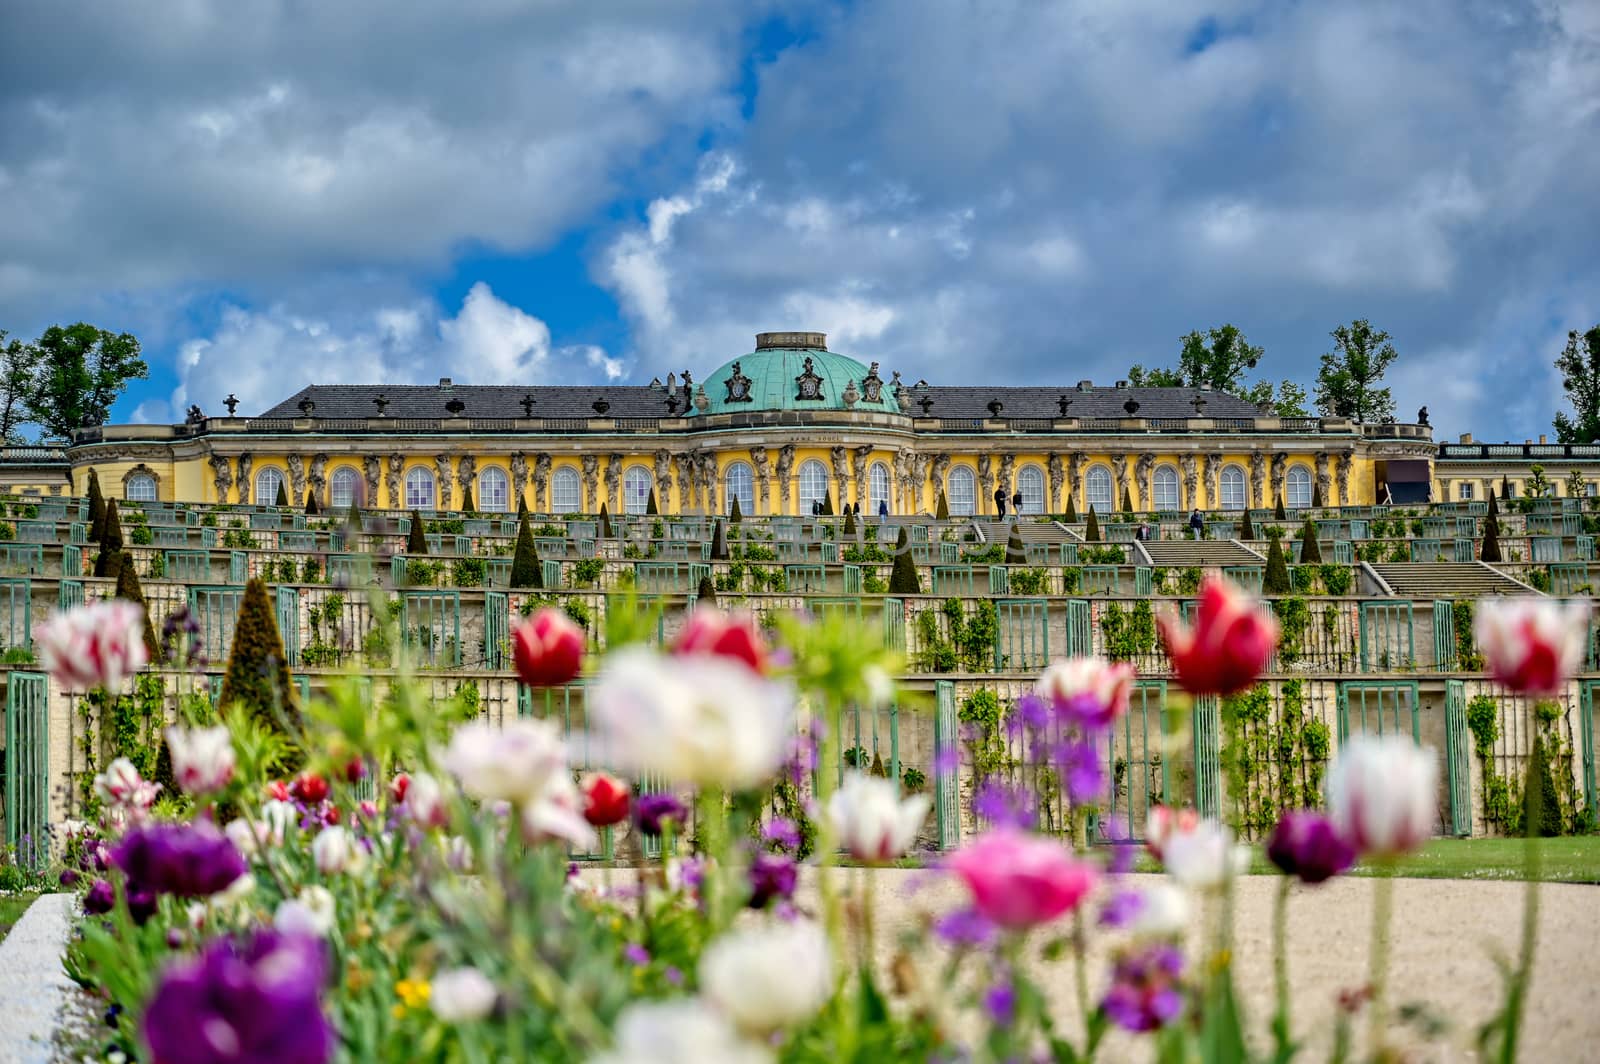 An exterior view of the Sanssouci Palace located in Sanssouci park in Potsdam, Germany.